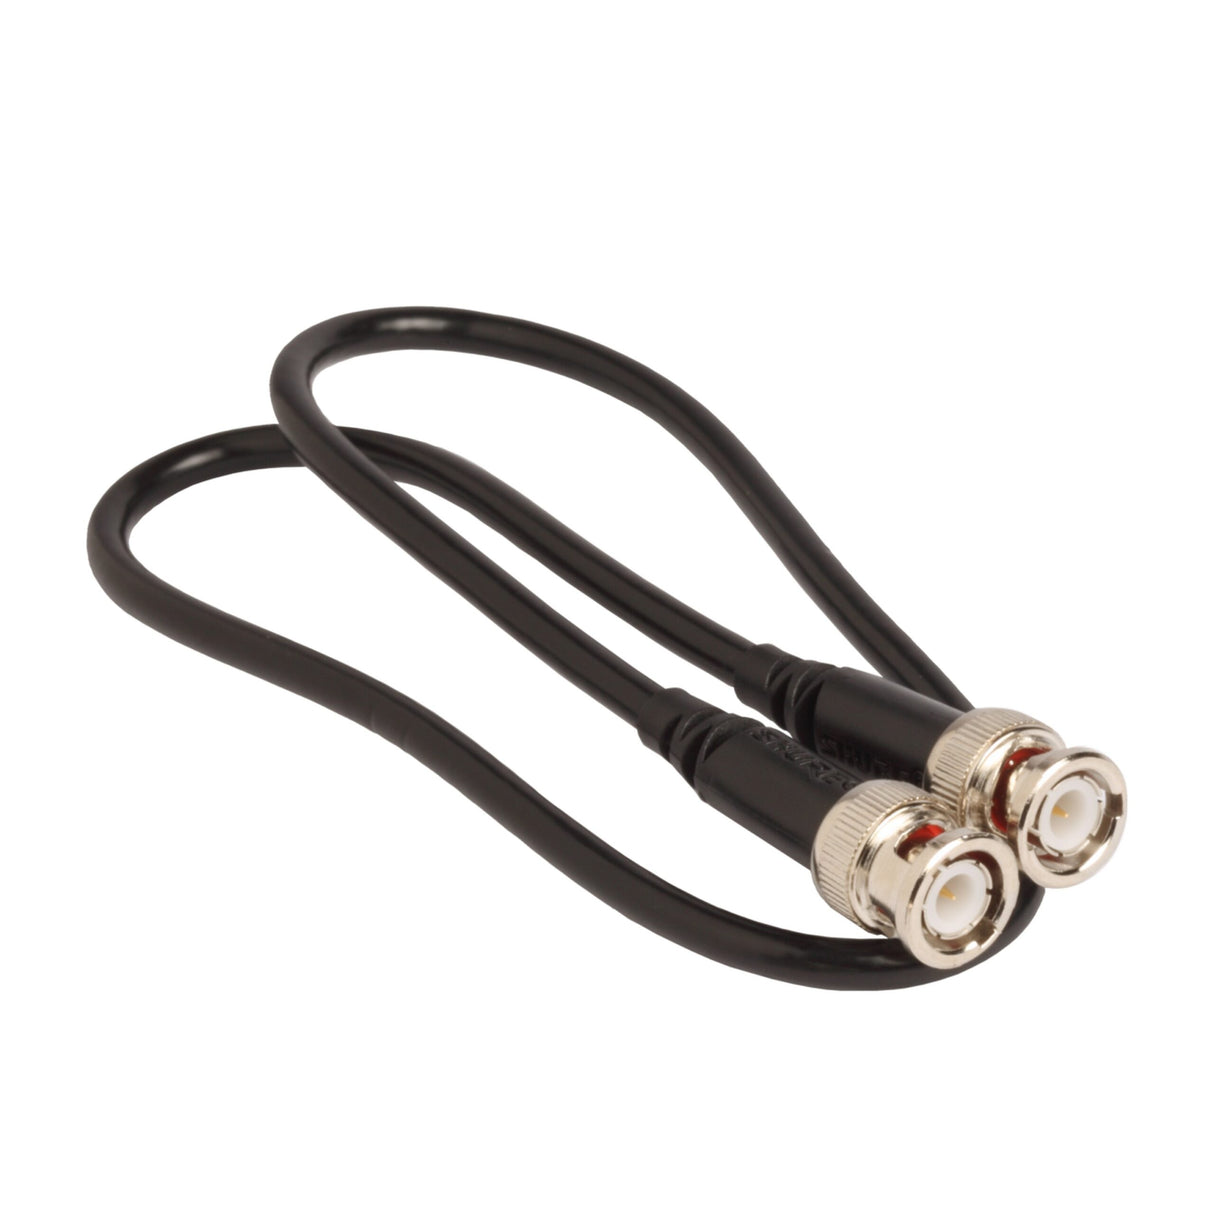 Shure UA802 Coaxial Cable Offers BNC to BNC Connection, 2 Foot